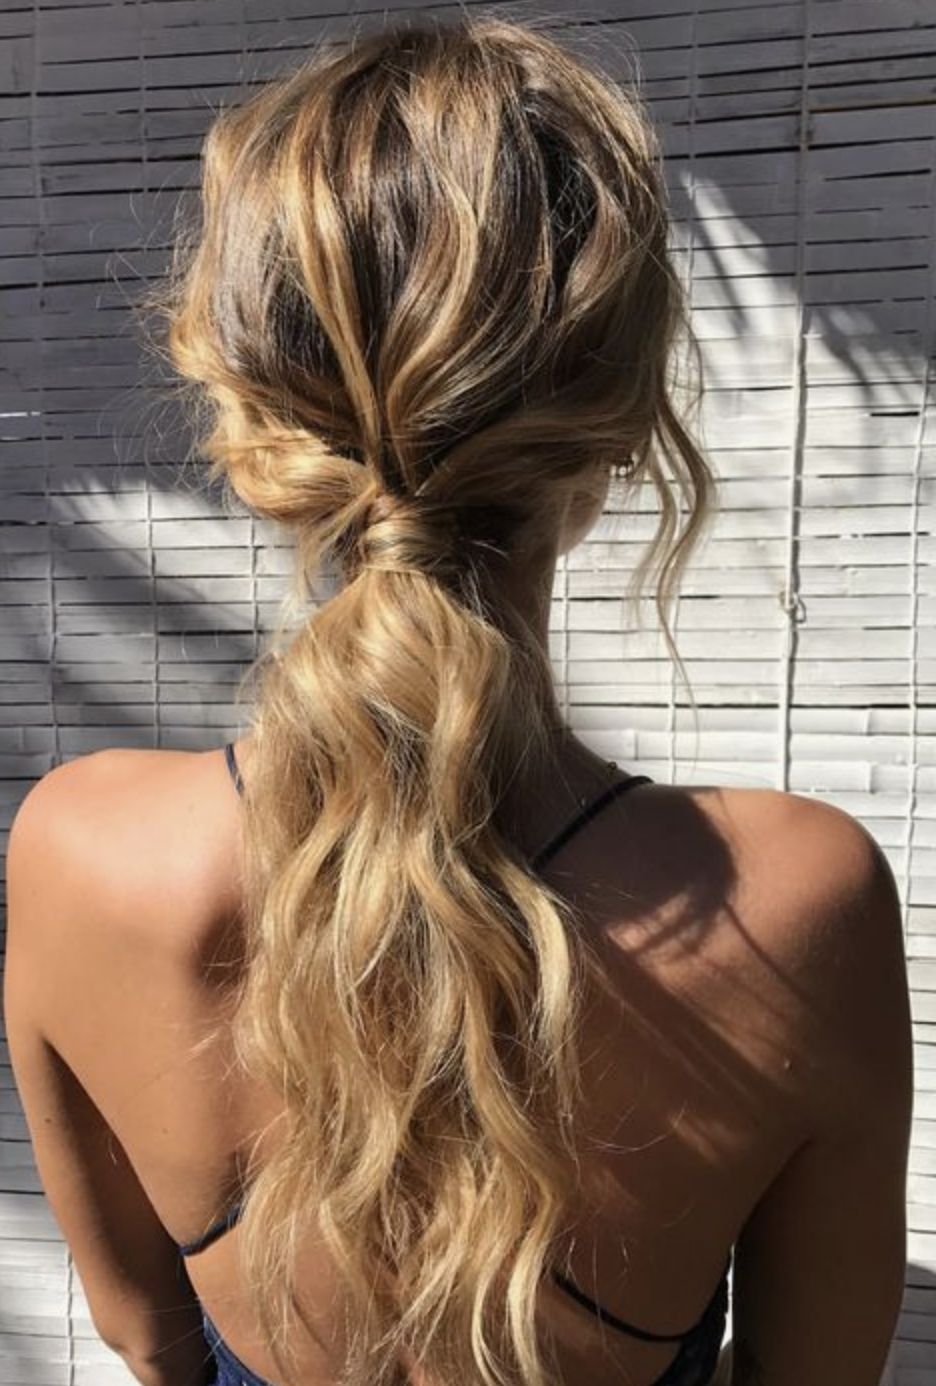 Most Recent Twisted And Tousled Ponytail Hairstyles Within Pinterest: •casey•/ Super Cute Twisted Messy Pony Hairstyle/ Follow (View 7 of 20)